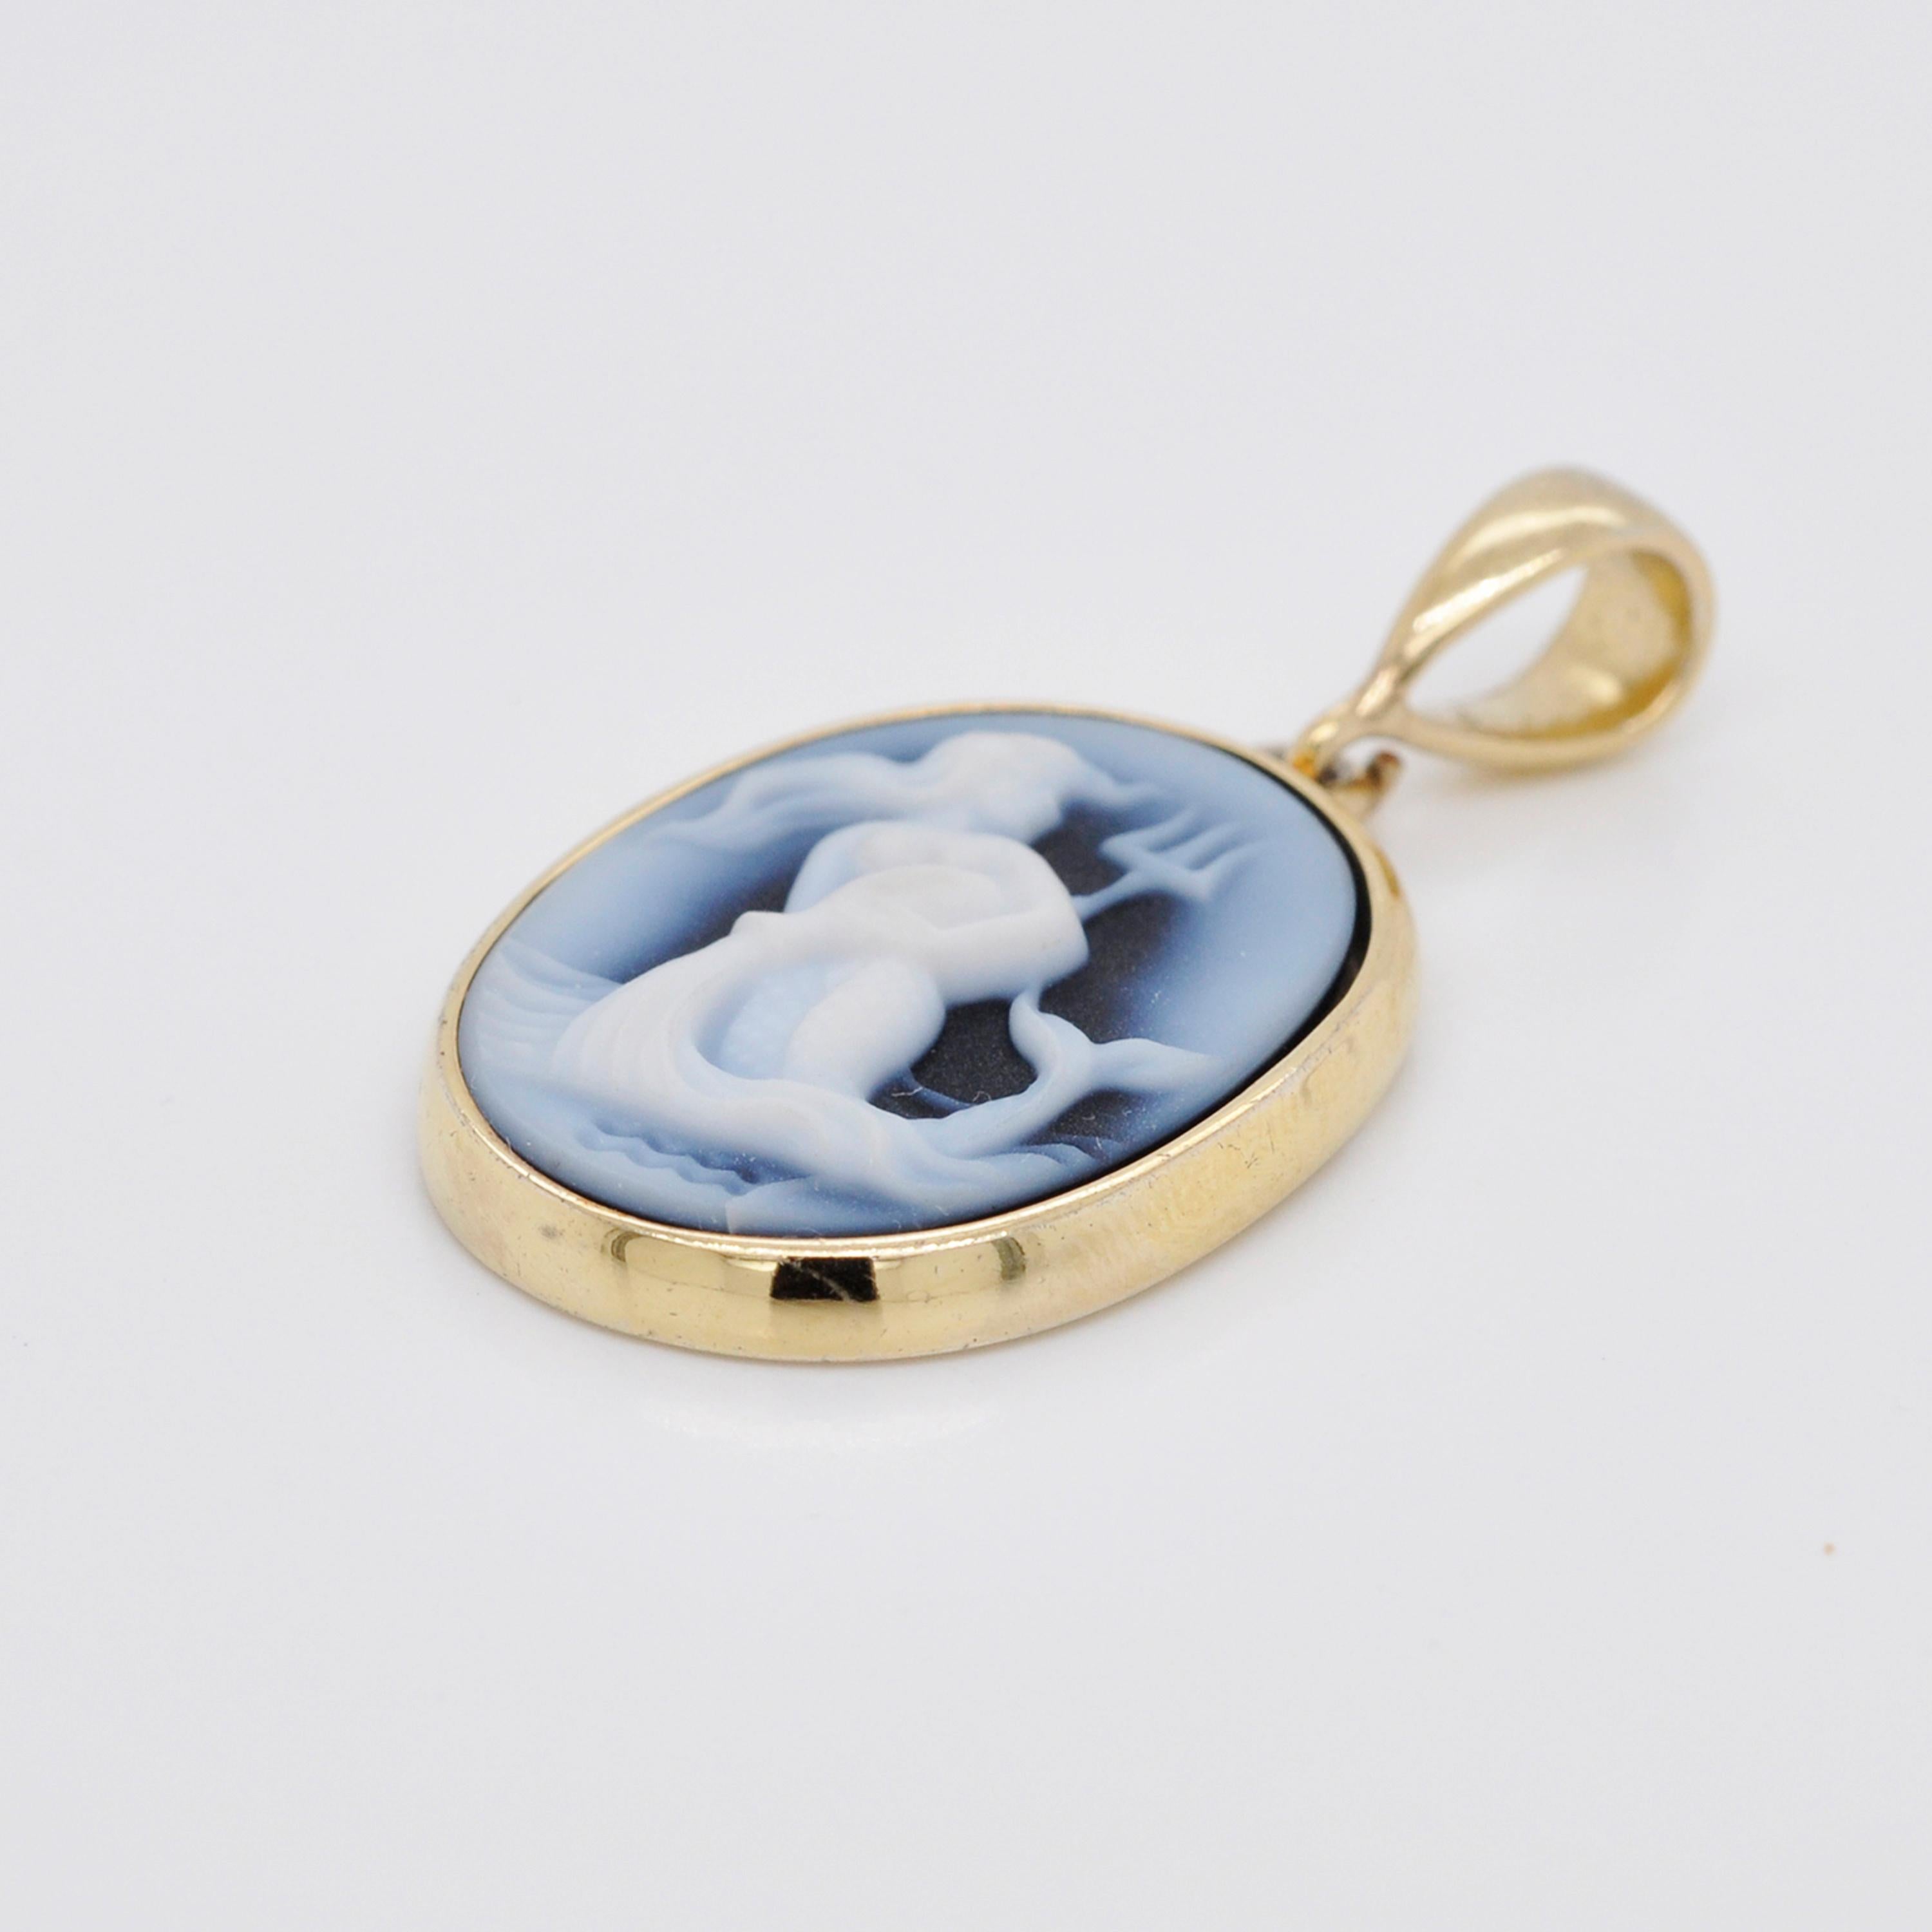 Aquarius Zodiac Agate Cameo 925 Sterling Silver Pendant Necklace In New Condition For Sale In Jaipur, Rajasthan